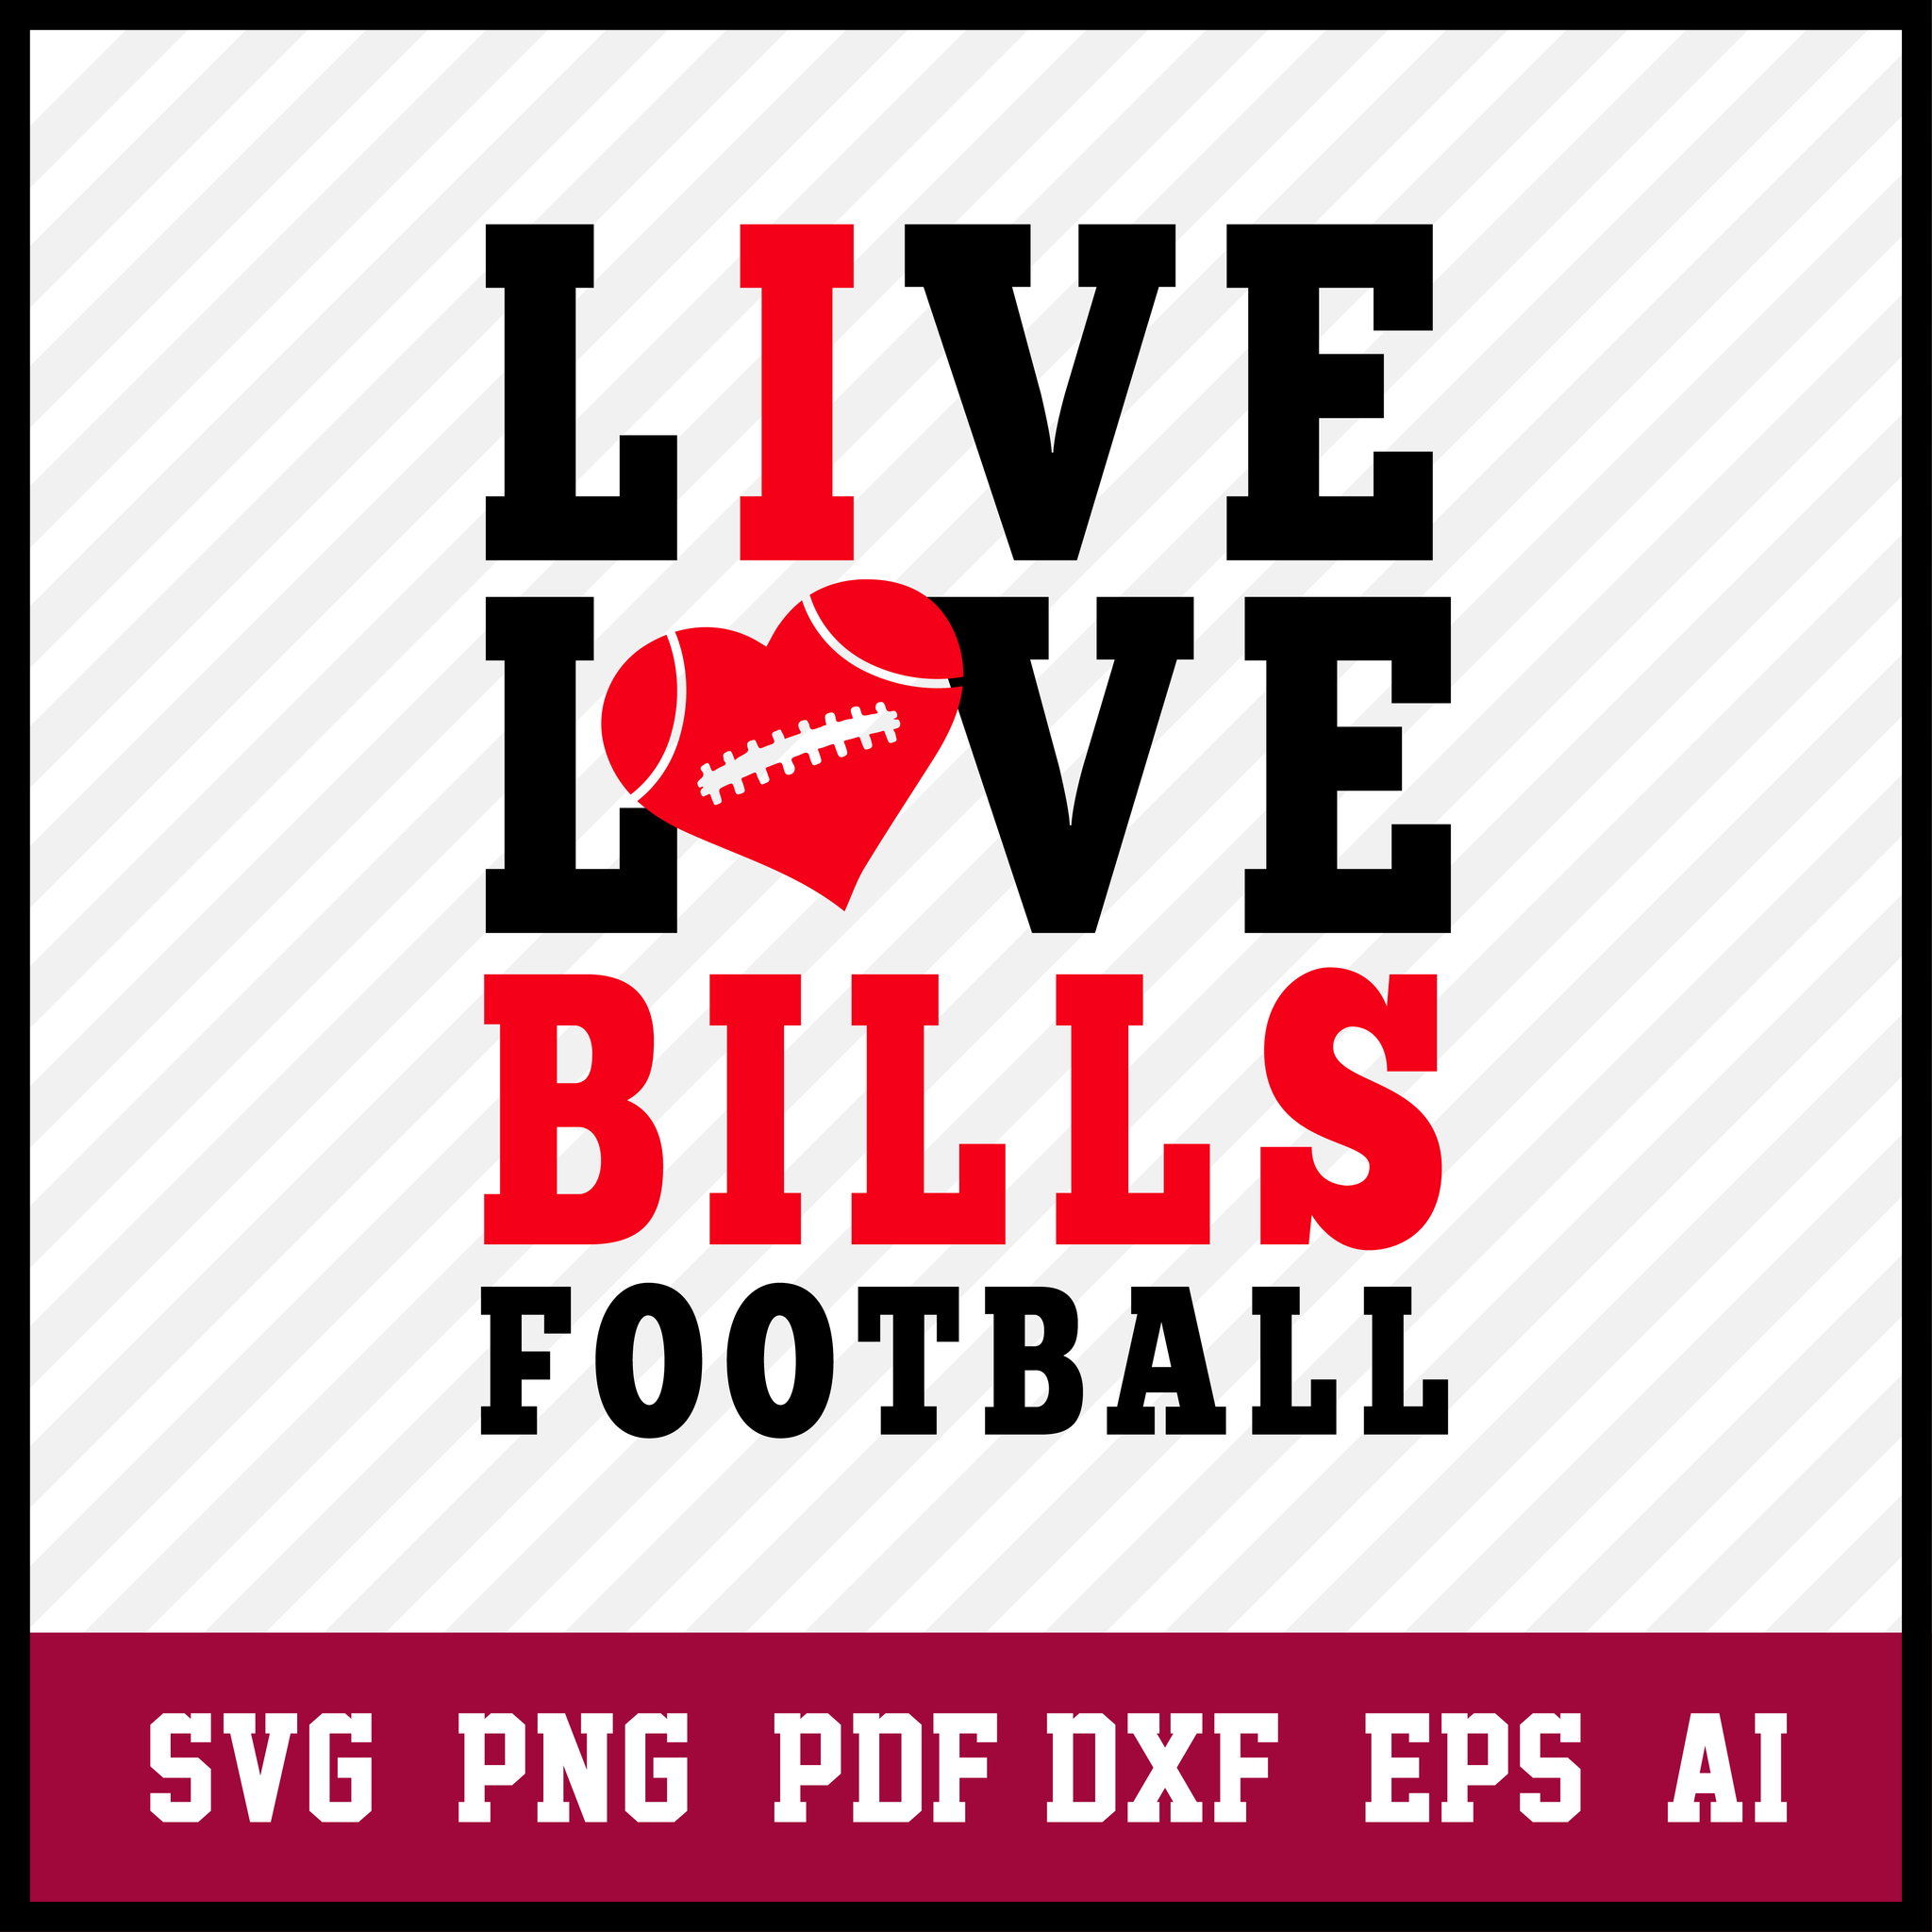 Live Love Bills Football Arizona Cardinals svg, Arizona Cardinals Logo, Cardinals Svg, Cardinals Clipart, Football SVG, Svg File for cricut, Nfl Svg  • INSTANT Digital DOWNLOAD includes: 1 Zip and the following file formats: SVG, DXF, PNG, AI, PDF